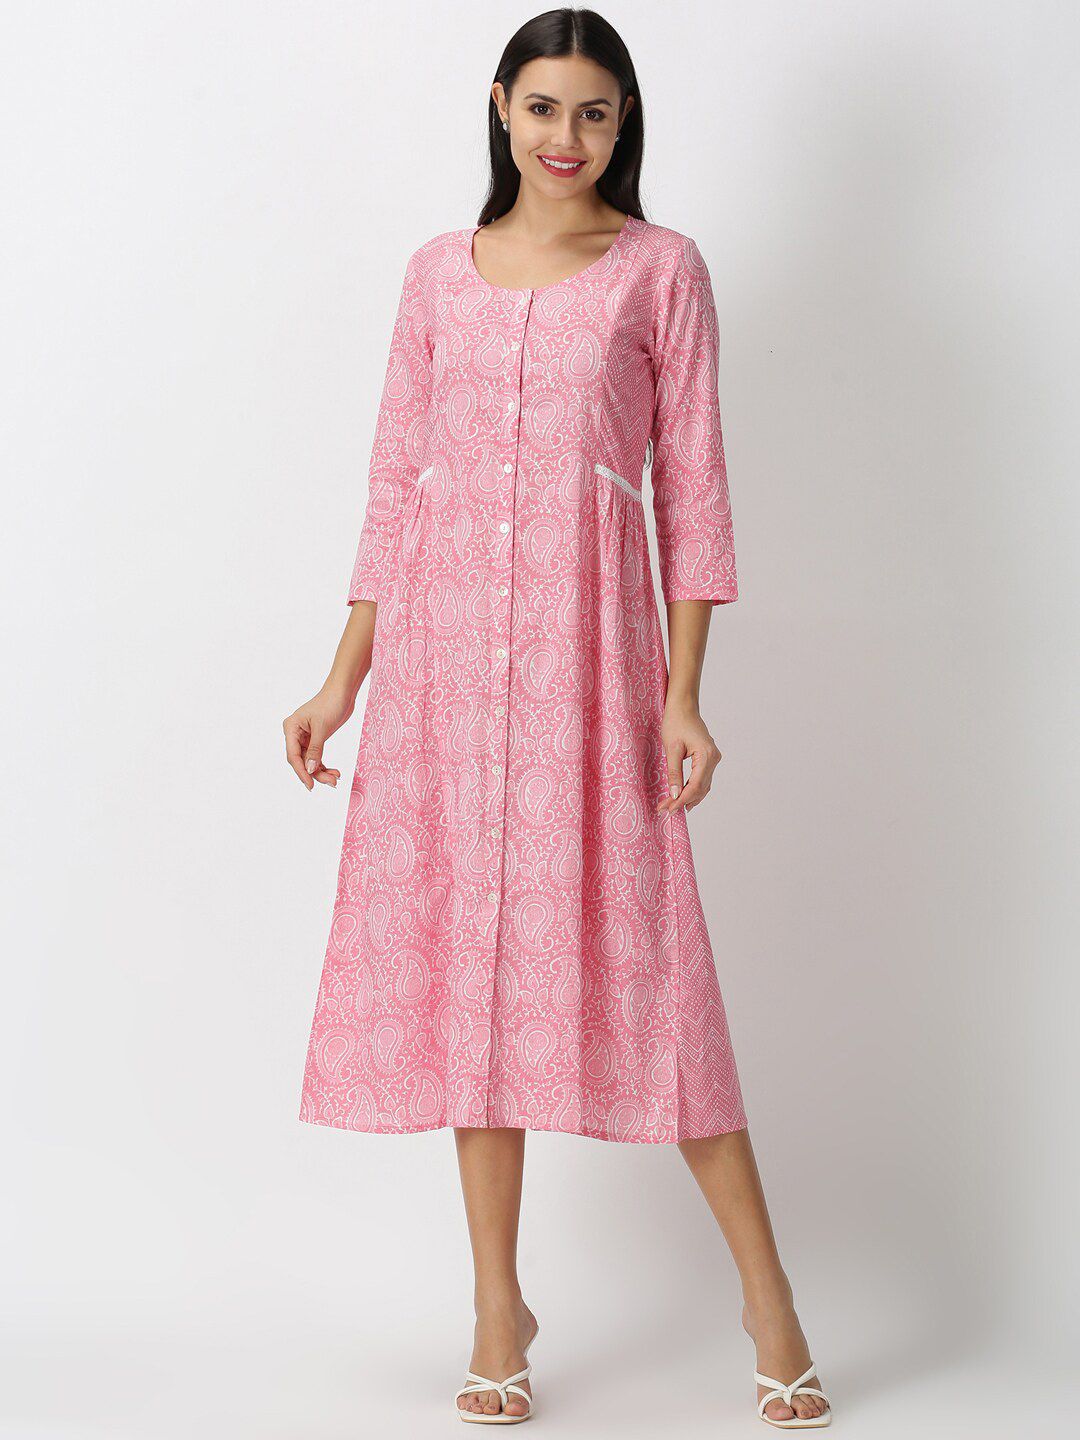 Saffron Threads Pink Paisley Printed Panelled A-Line Midi Dress Price in India